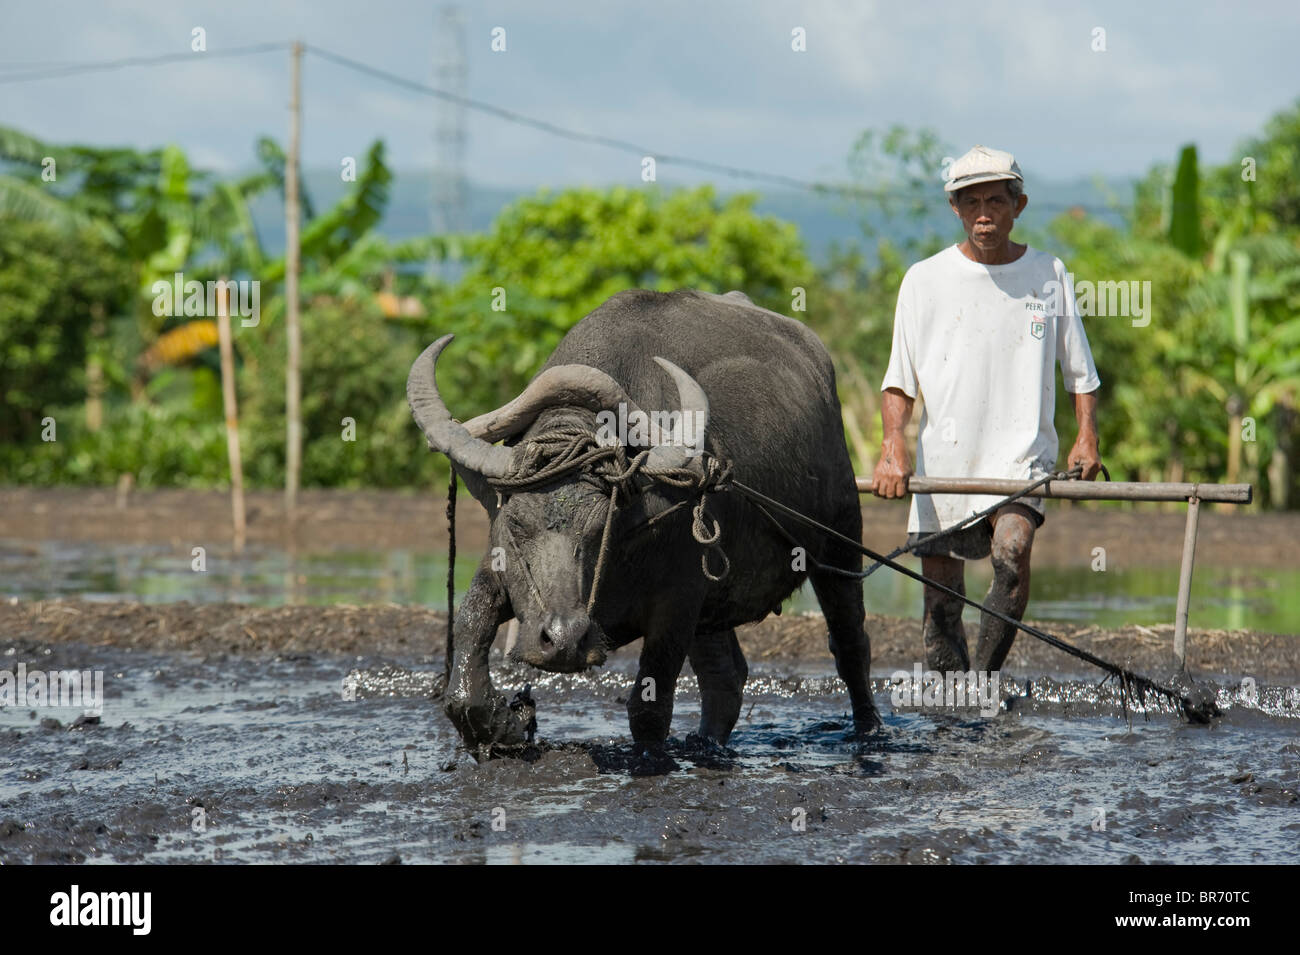 Farmer And His Trusted Carabao Water Buffalo Ploughing Field To